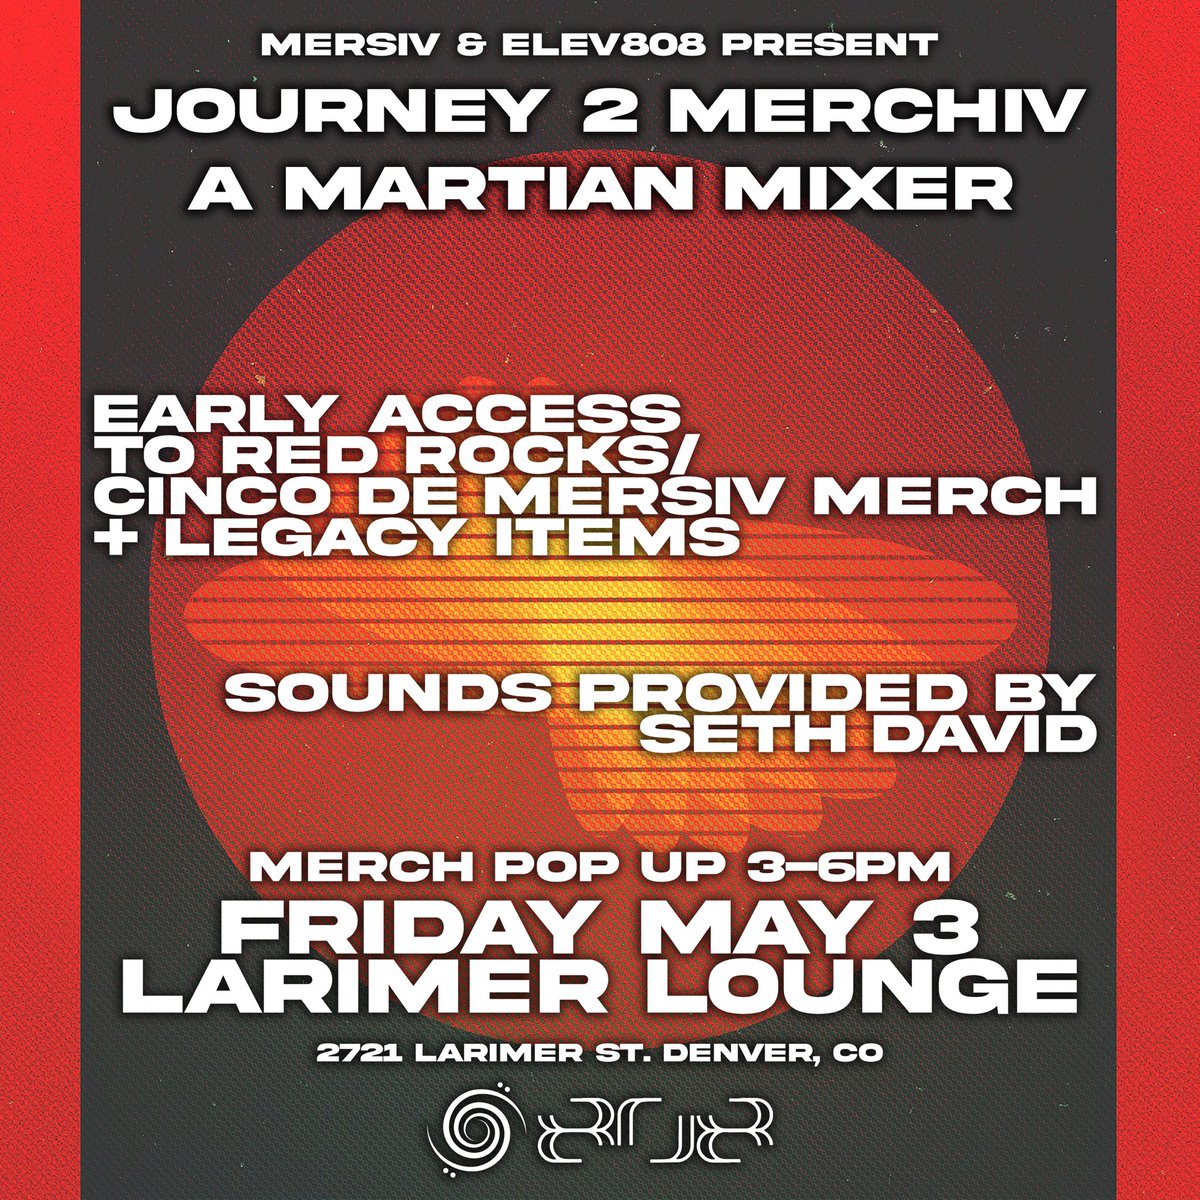 FIRST LOOKS @ Journey 2 Merchiv & Cinco de Merchiv👀🌀 We will also be hosting a MARTIAN MIXER 👽 merch Pop-Up this Friday at @LarimerLounge with the @elev808designs fam to give y’all the chance to beat the merch line at Red Rocks & Cinco de Mersiv this weekend ☄️ The homie…